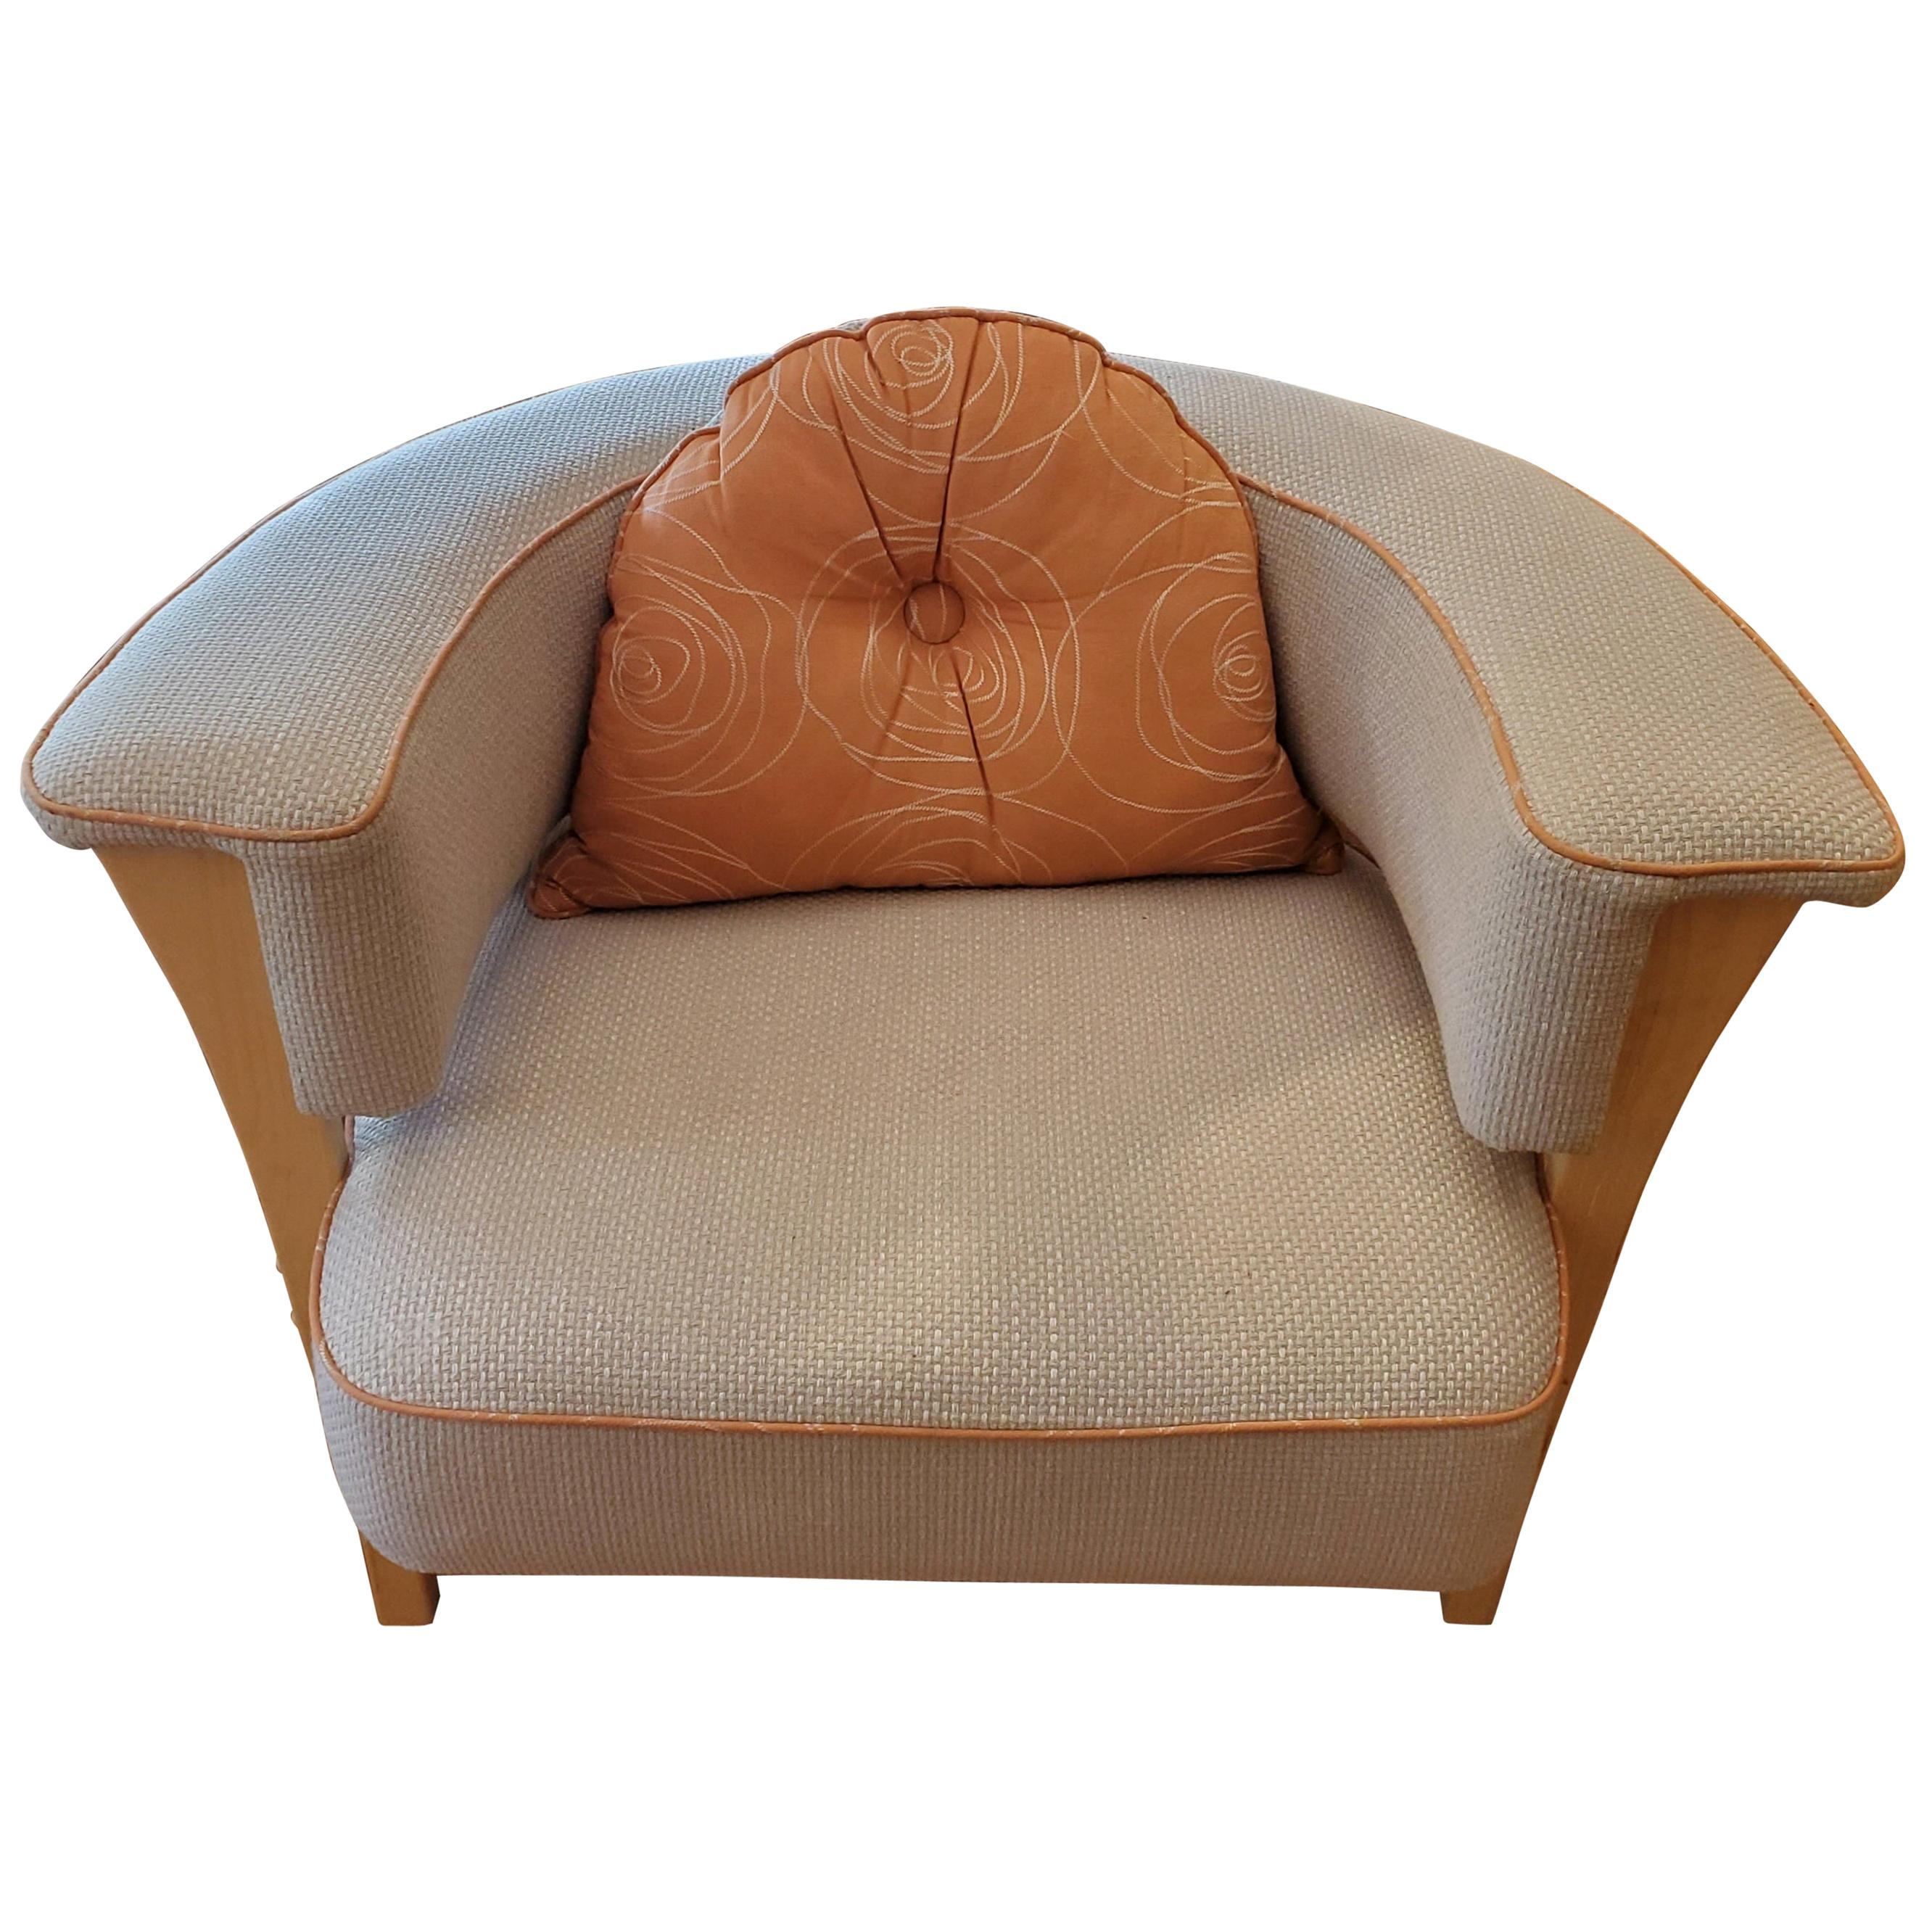 Called the “Viking Chair,” this Mid-Century Modern style armchair is extremely comfortable and will be a fabulous addition to your sitting room. Styled after a 1960s Danish design, it is upholstered in natural linen with orange piping and an orange